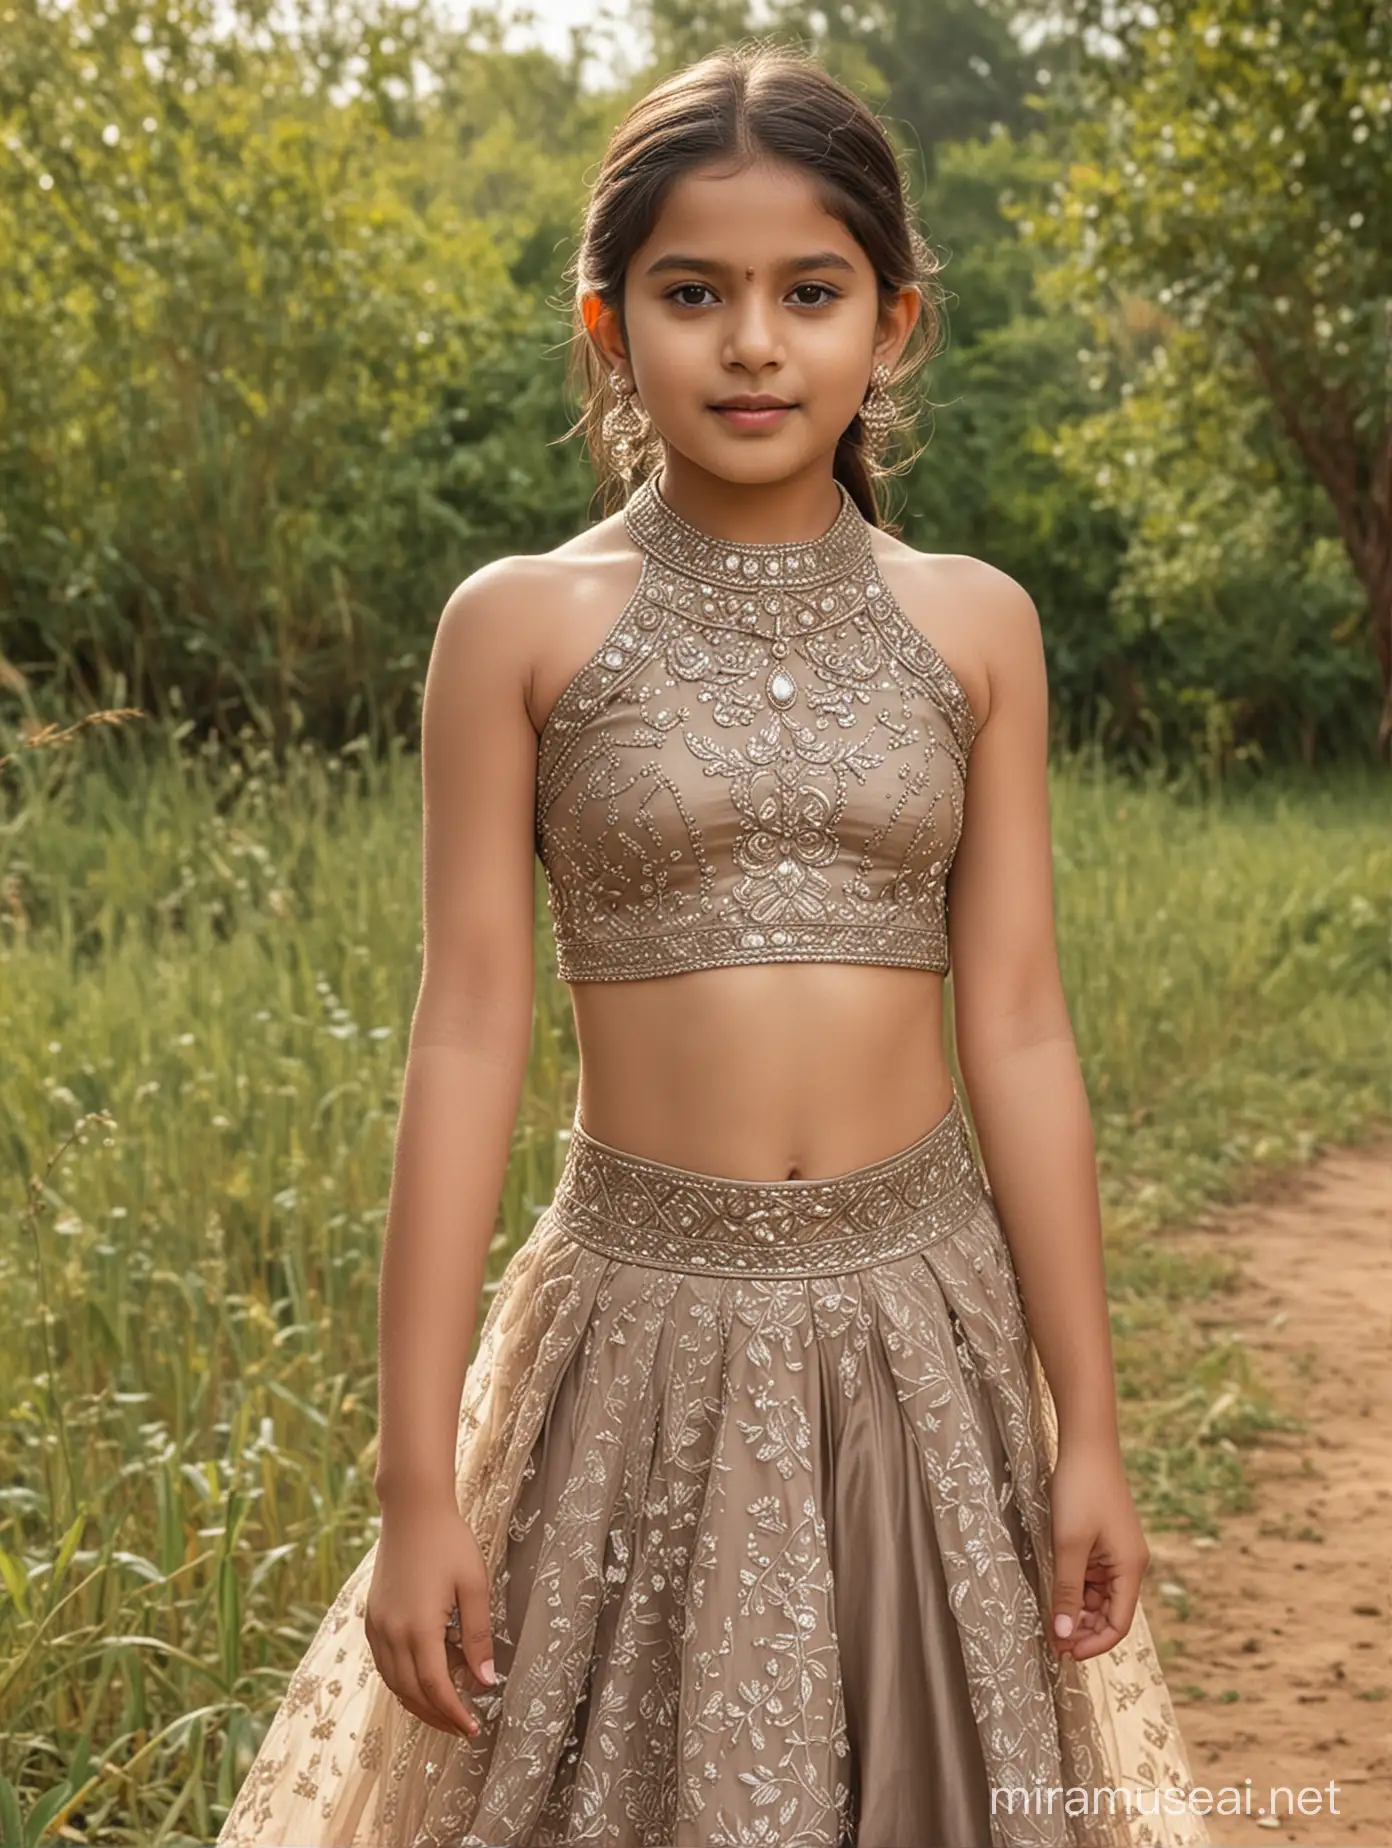 9 years old girl, white skin, beautiful, hyper realistic, wearing taupe very thin halter neck very thin choli with lehenga, her front view, in nature